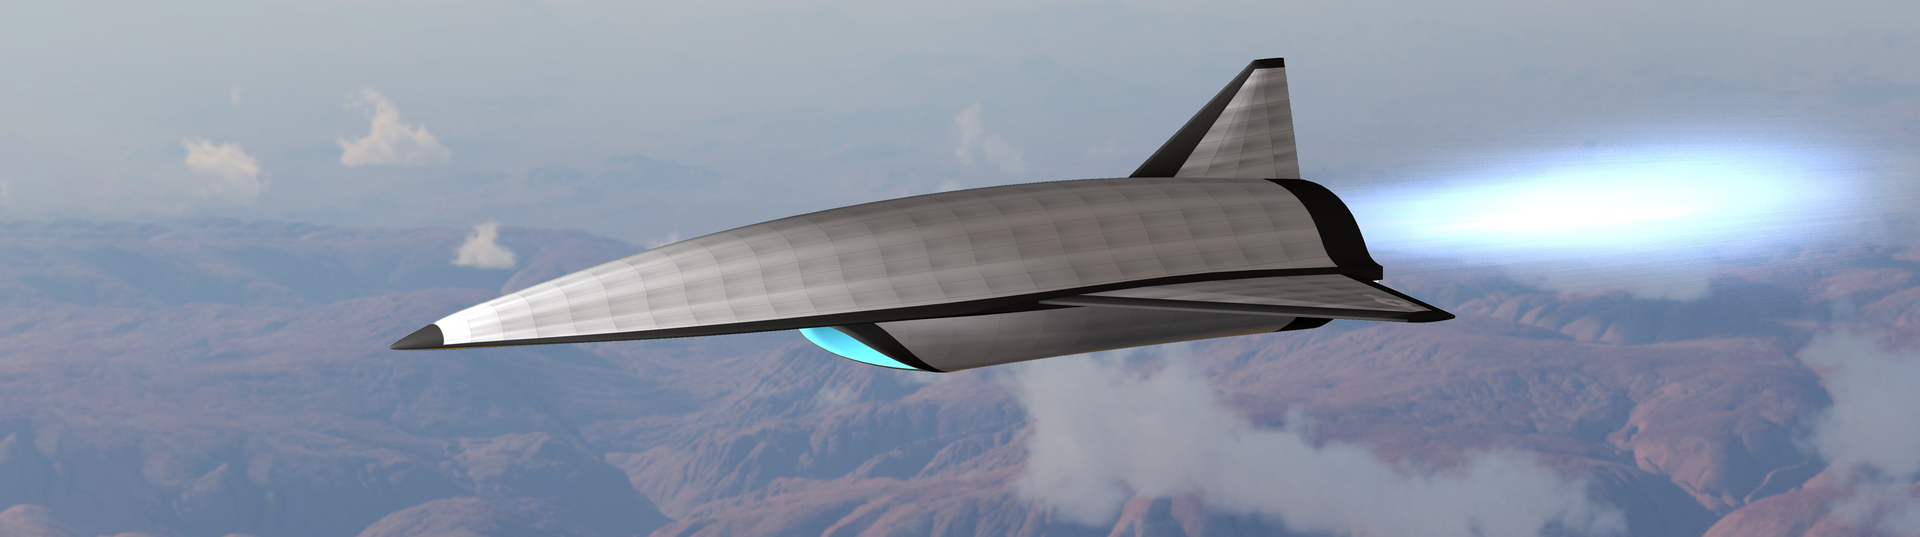 concept of air-breathing hypersonic system